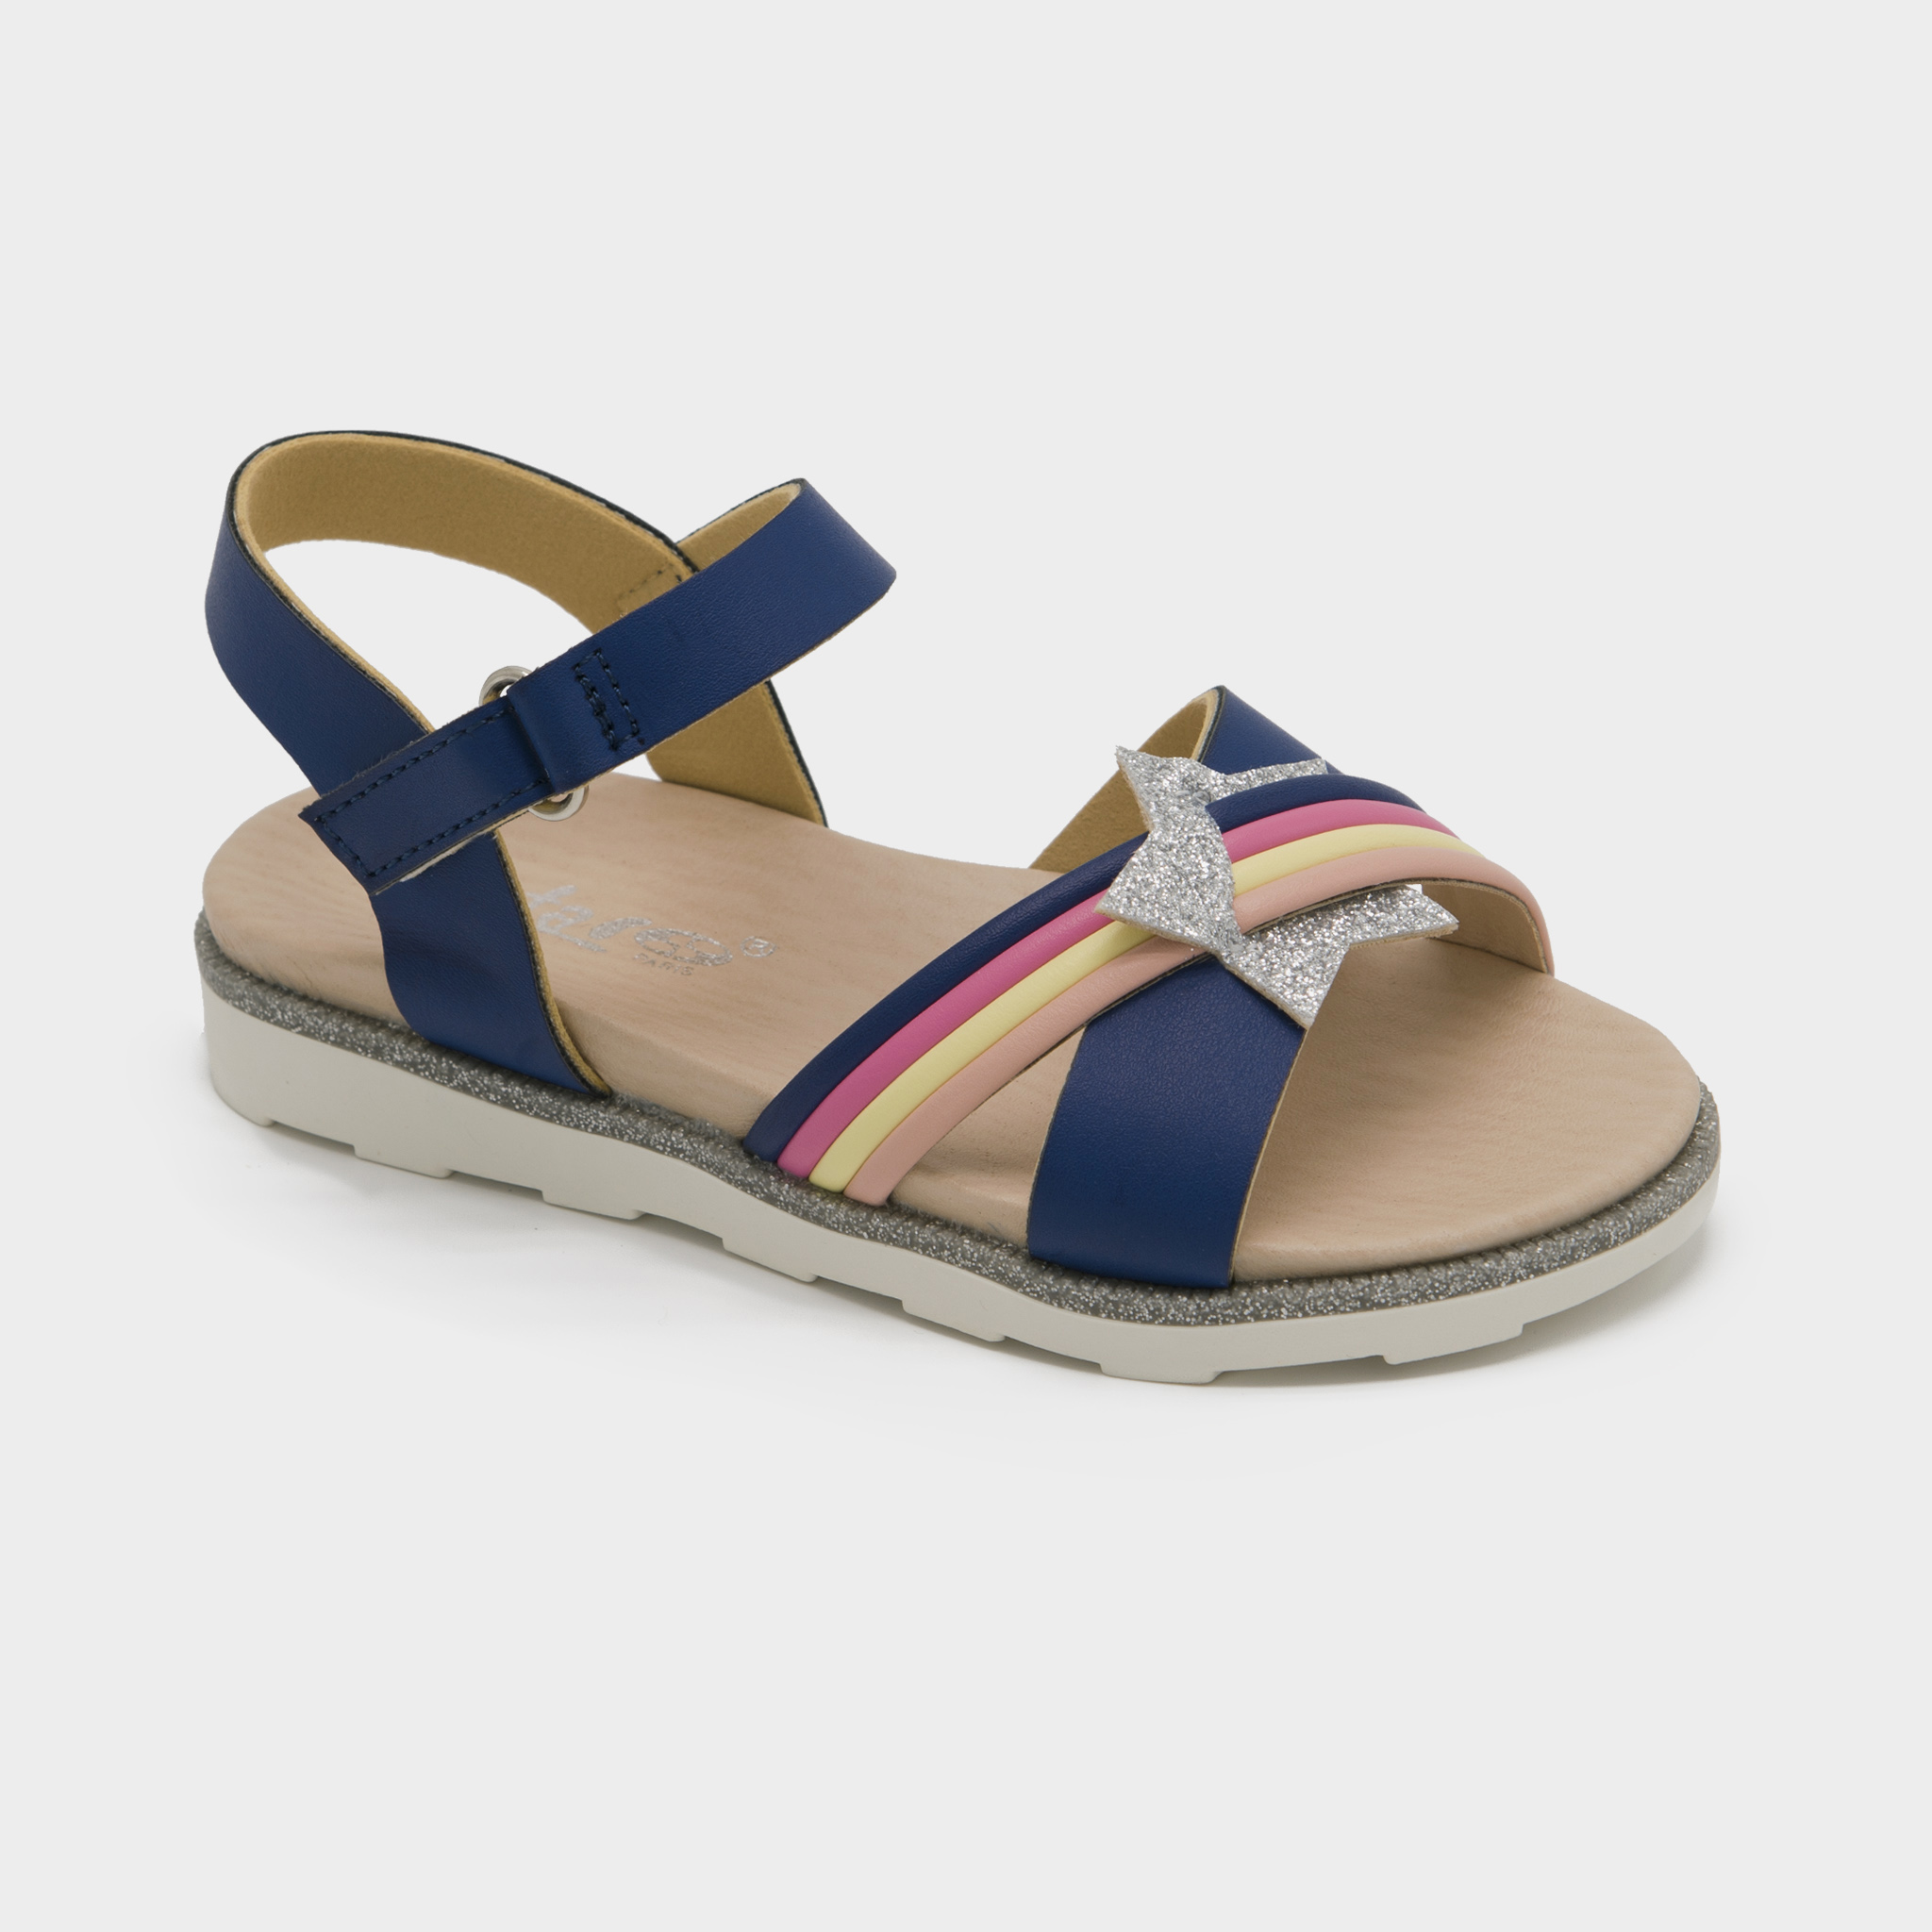 Tory Burch sale: Up to 50% off Tory Burch sandals, swim, purses and more